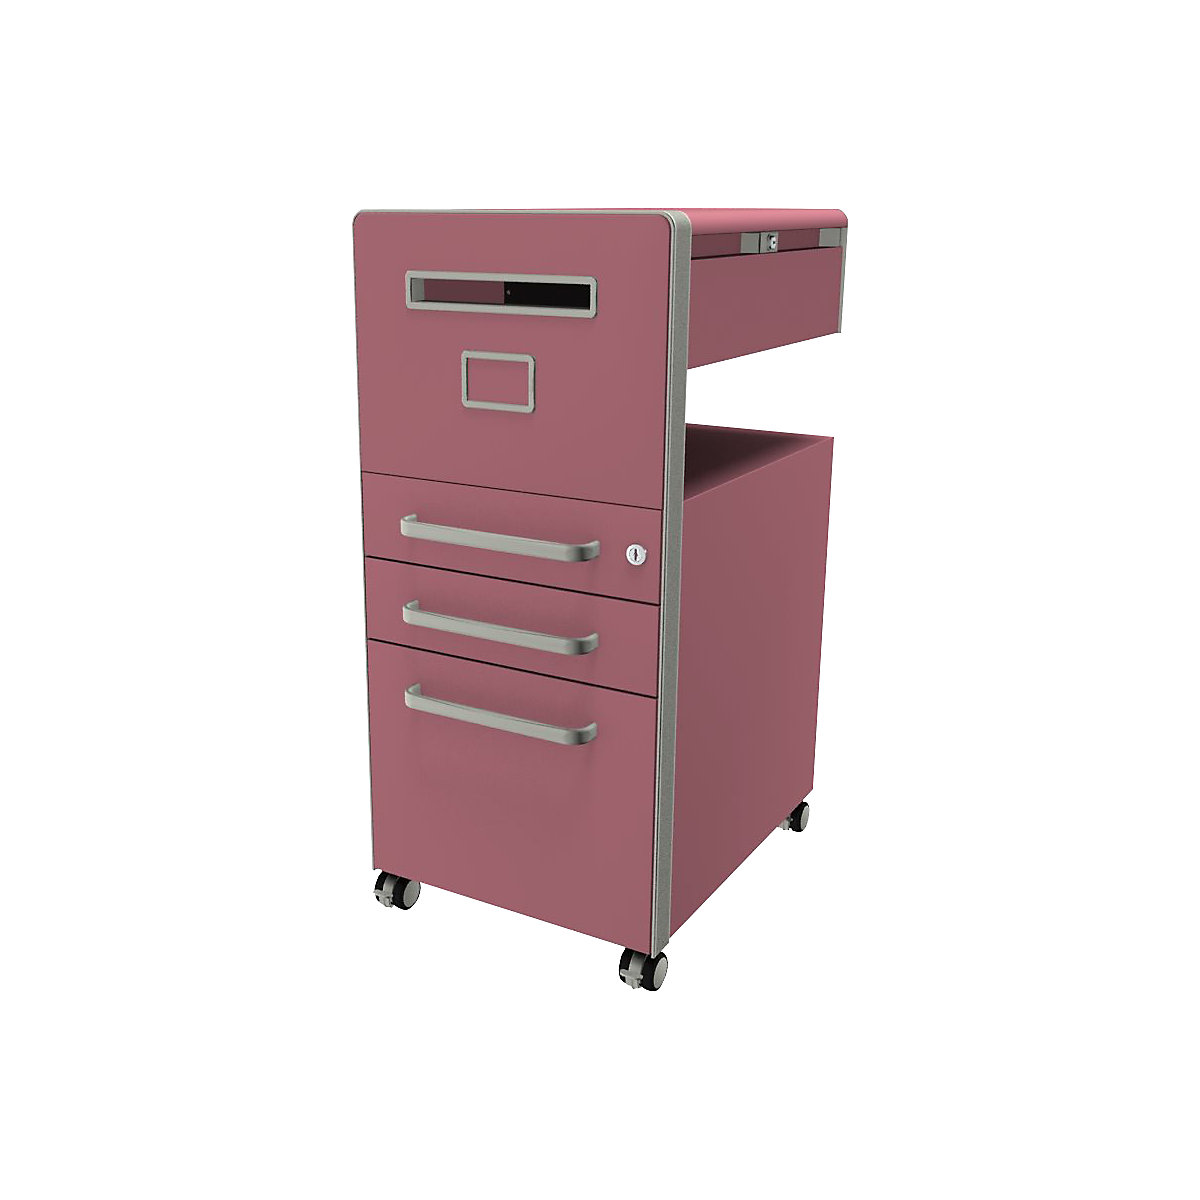 Bite™ pedestal furniture, with 1 pin board, opens on the left side - BISLEY